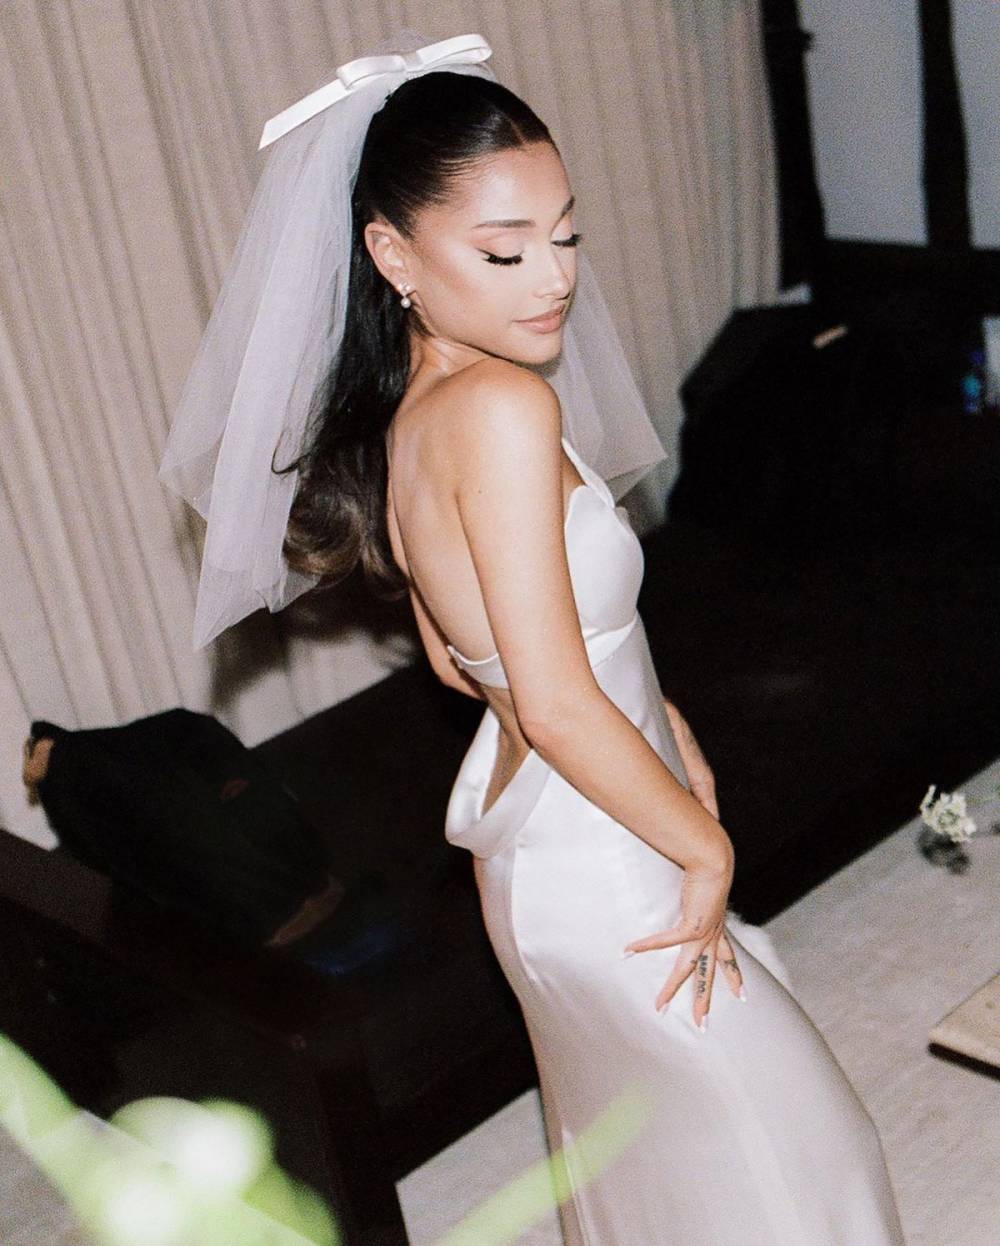 Ariana Grande Covered Up Her Arm Tattoos for Her Wedding Day: Photos